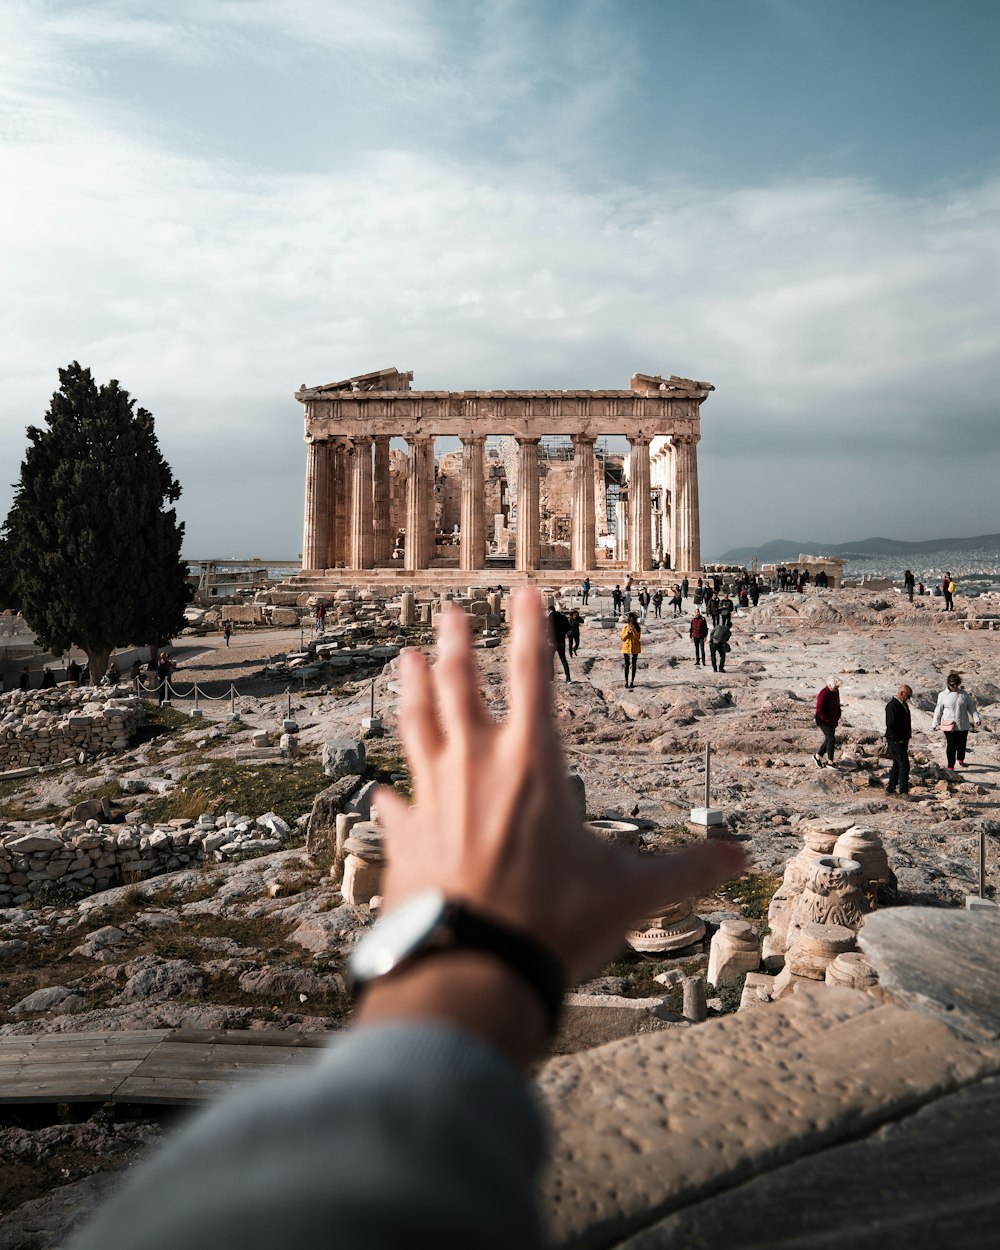 a hand reaching up towards the ruins of a building